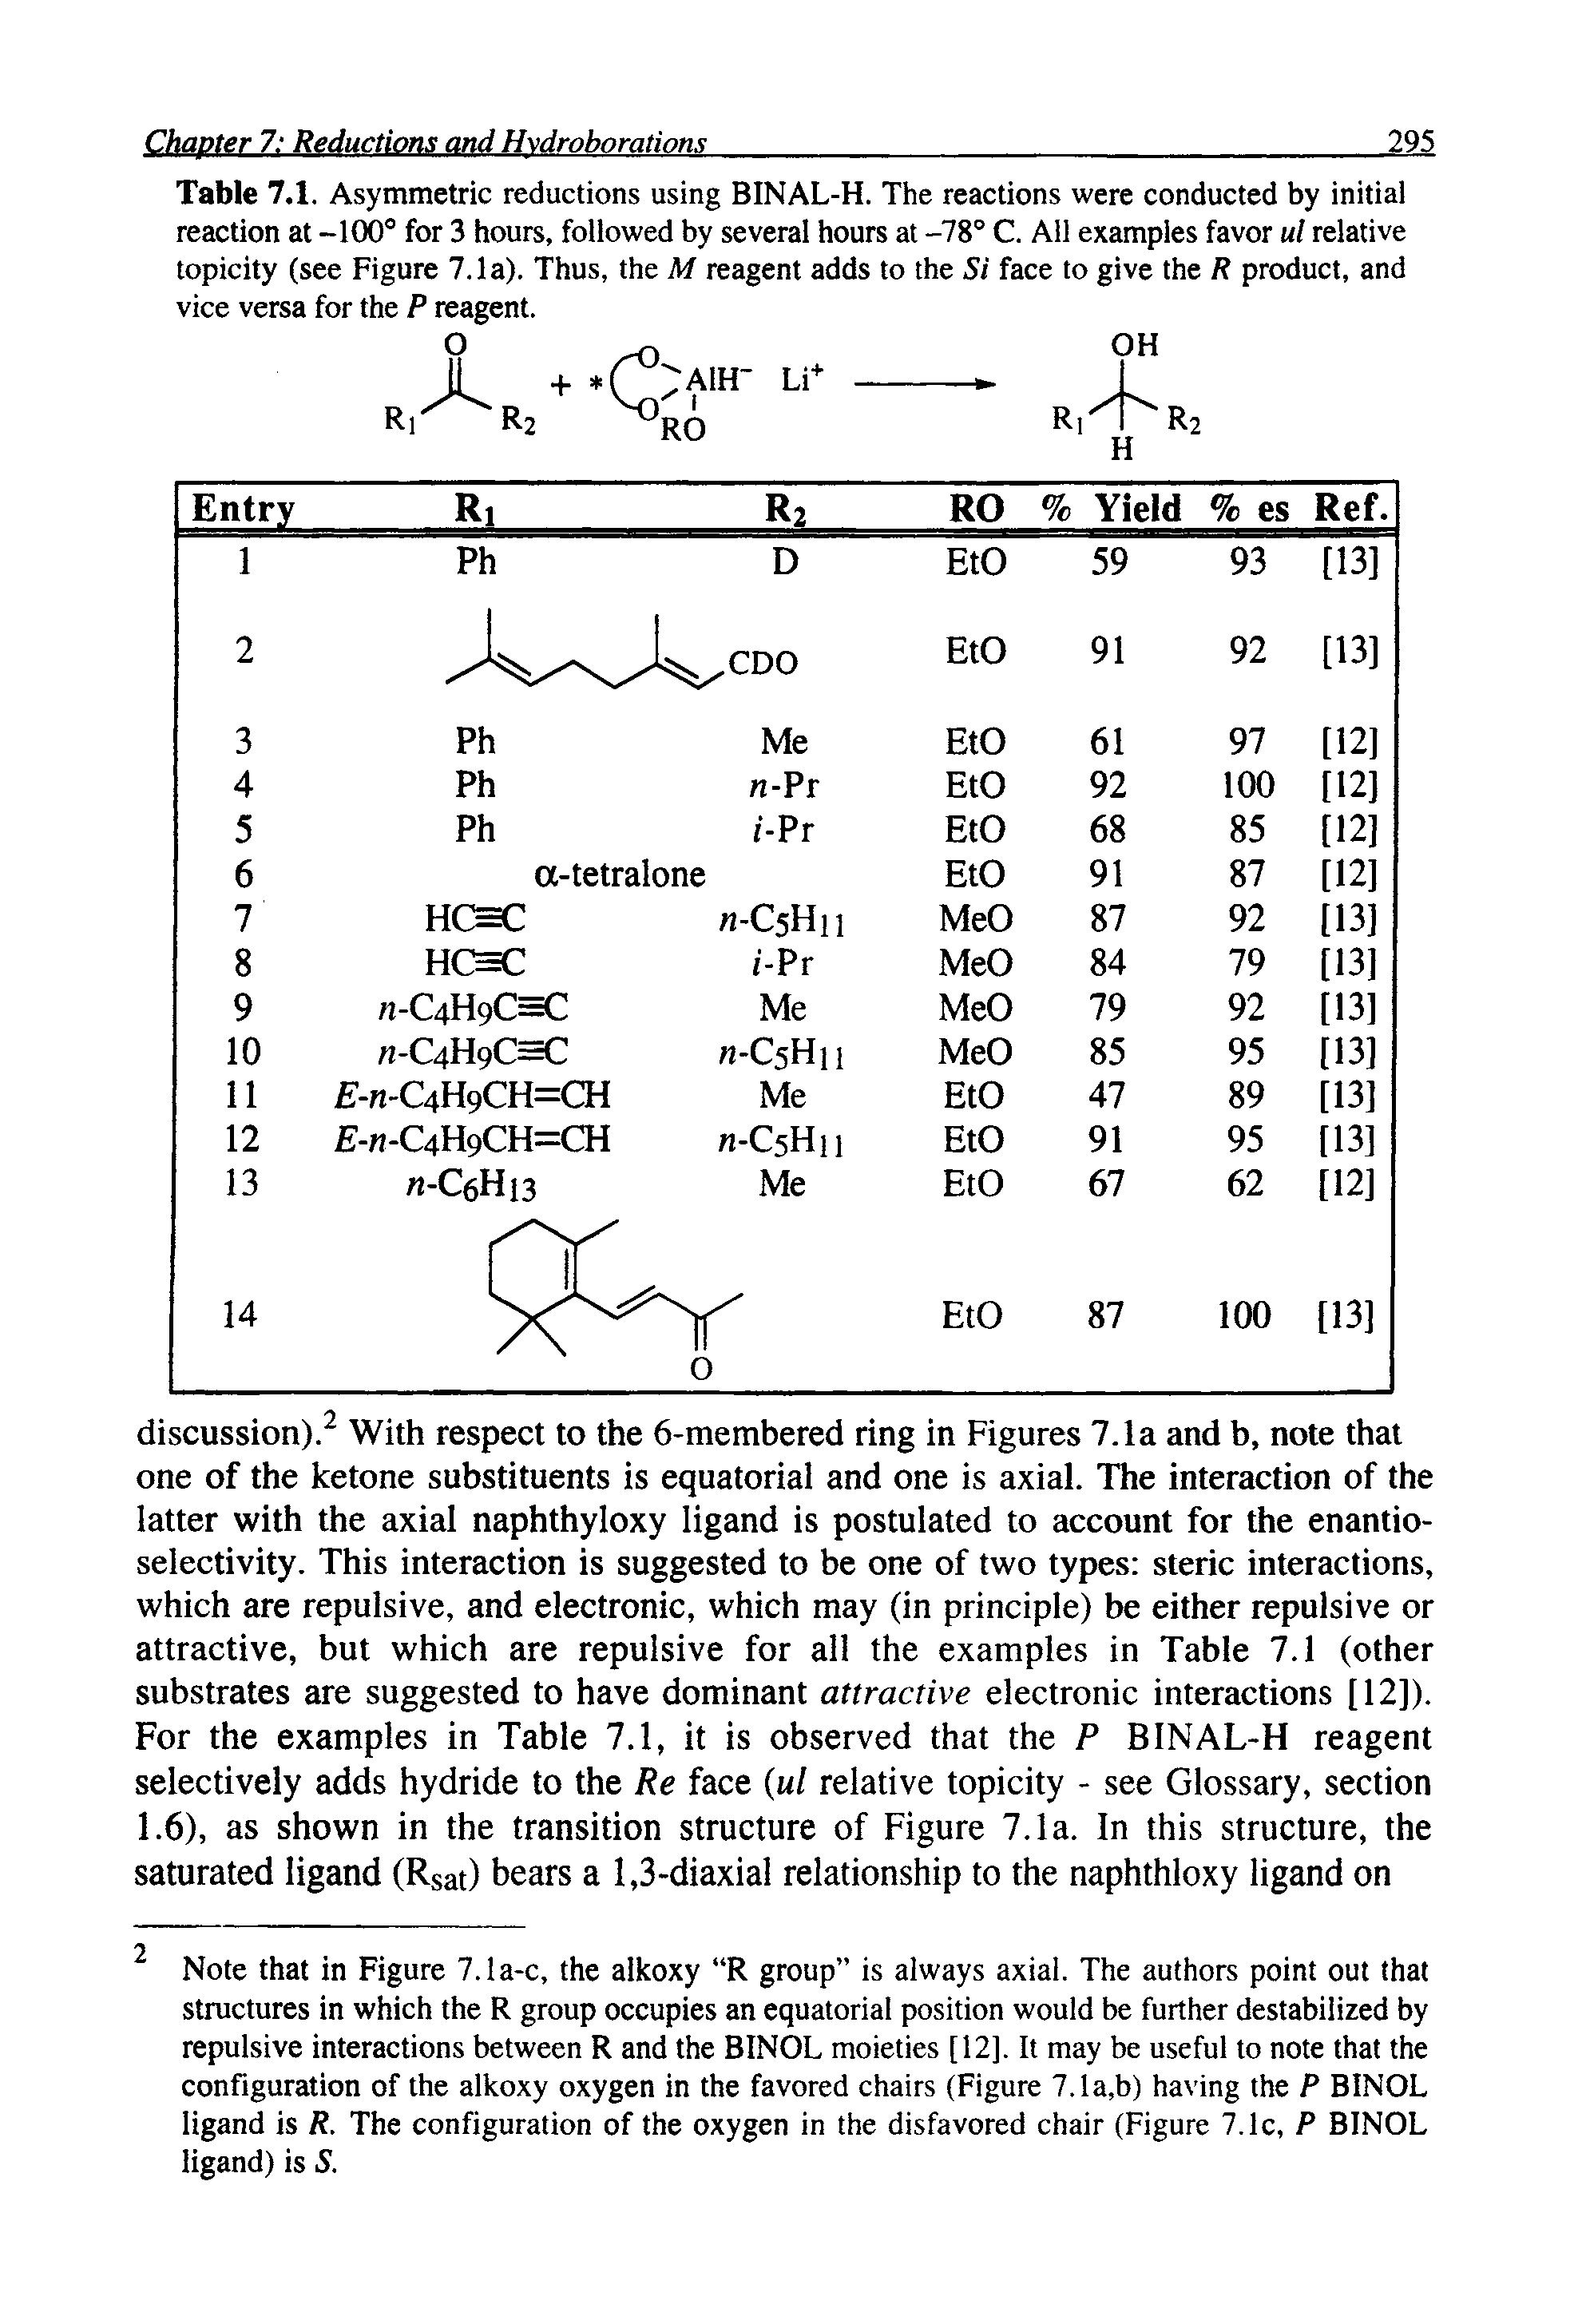 Table 7.1. Asymmetric reductions using BINAL-H. The reactions were conducted by initial reaction at -100° for 3 hours, followed by several hours at -78° C. All examples favor ul relative topicity (see Figure 7.1a). Thus, the M reagent adds to the Si face to give the R product, and vice versa for the P reagent.